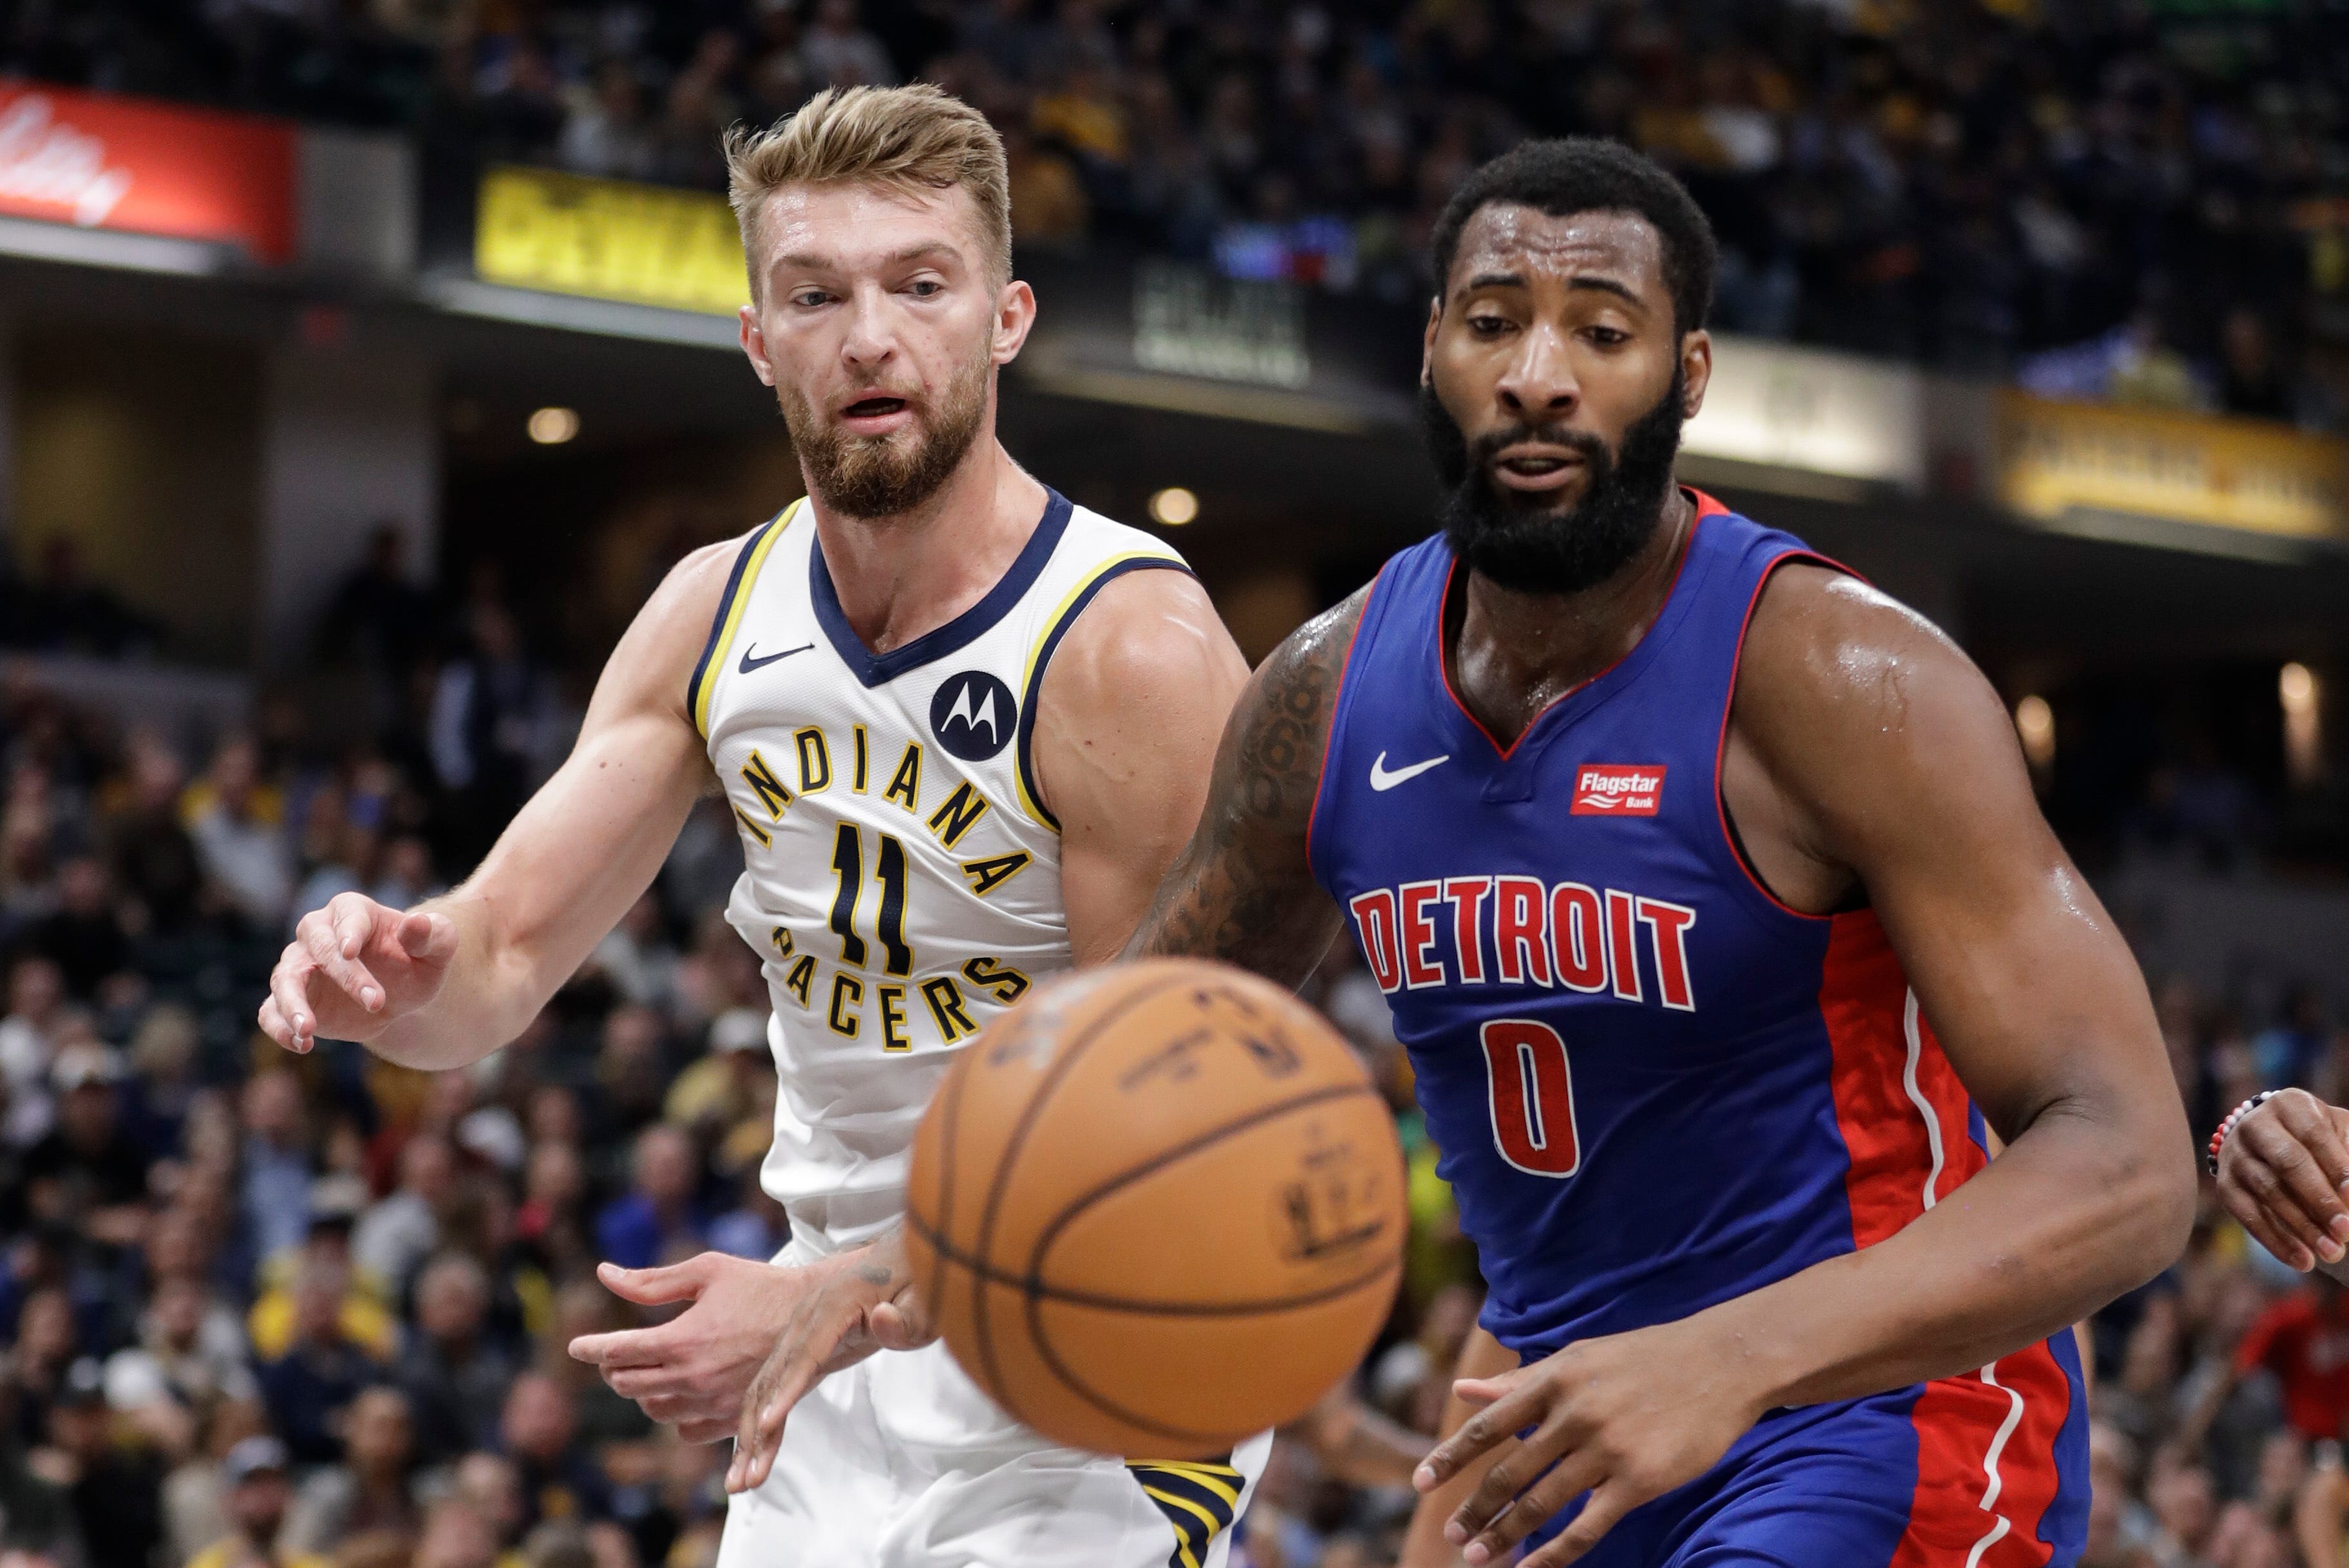 Indiana Pacers' Domantas Sabonis (11) and Detroit Pistons' Andre Drummond (0) eye a loose ball during the first half.